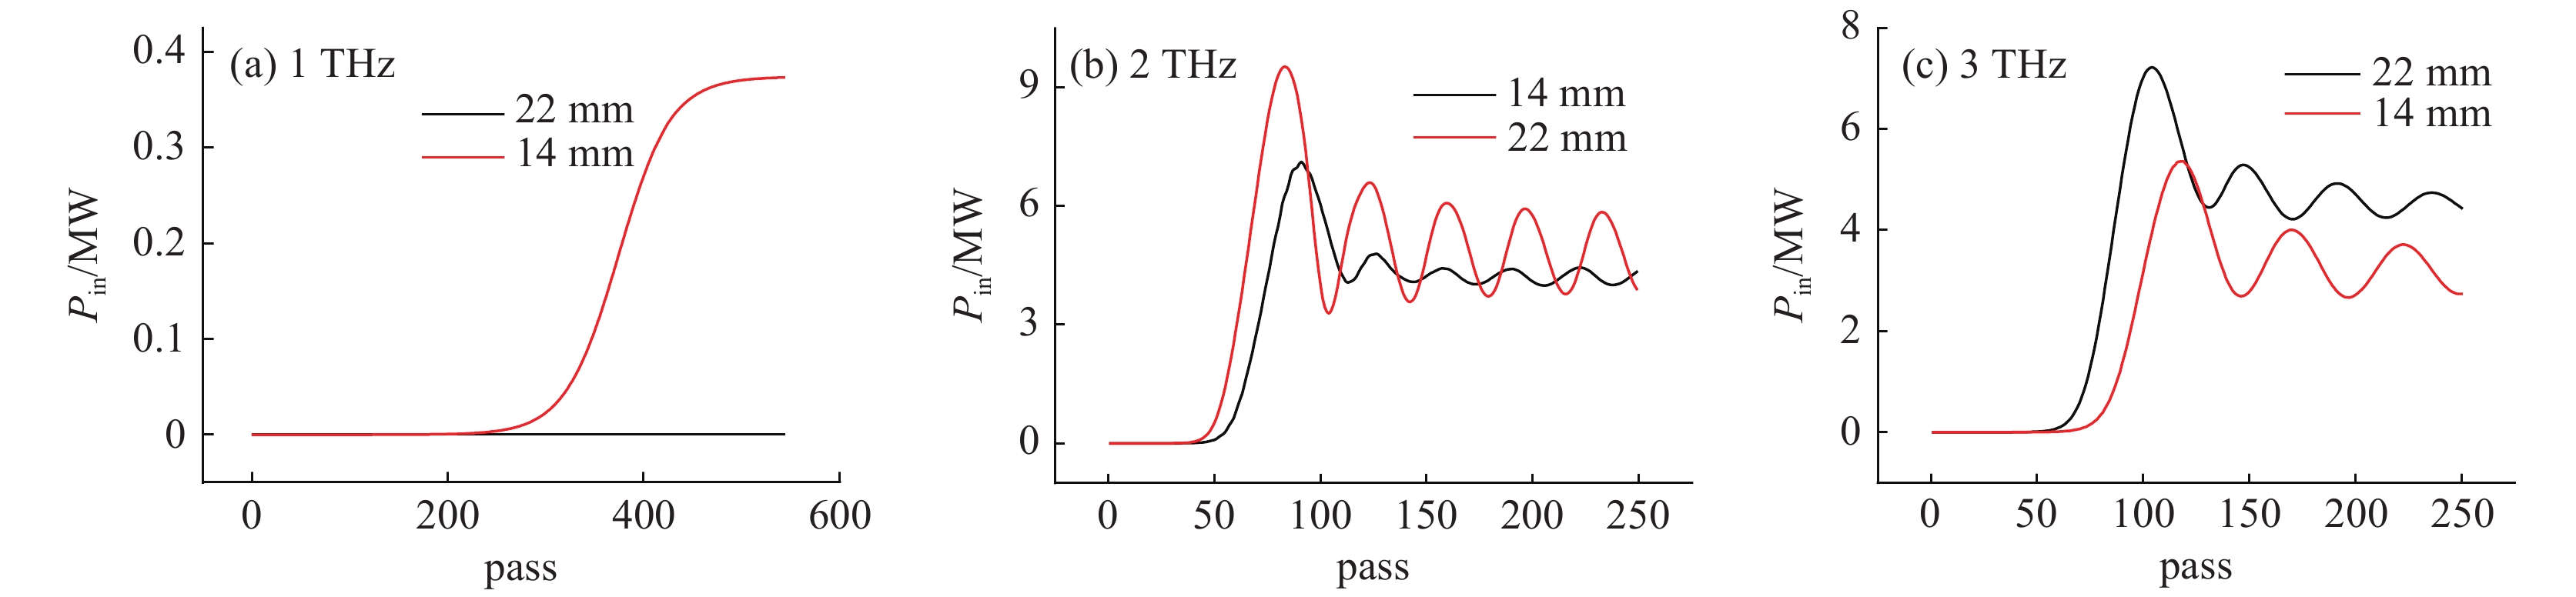 Curve of power in the optical cavities (Pin) to the waveguide gap 22 mm and 14 mm in 1 THz vs pass